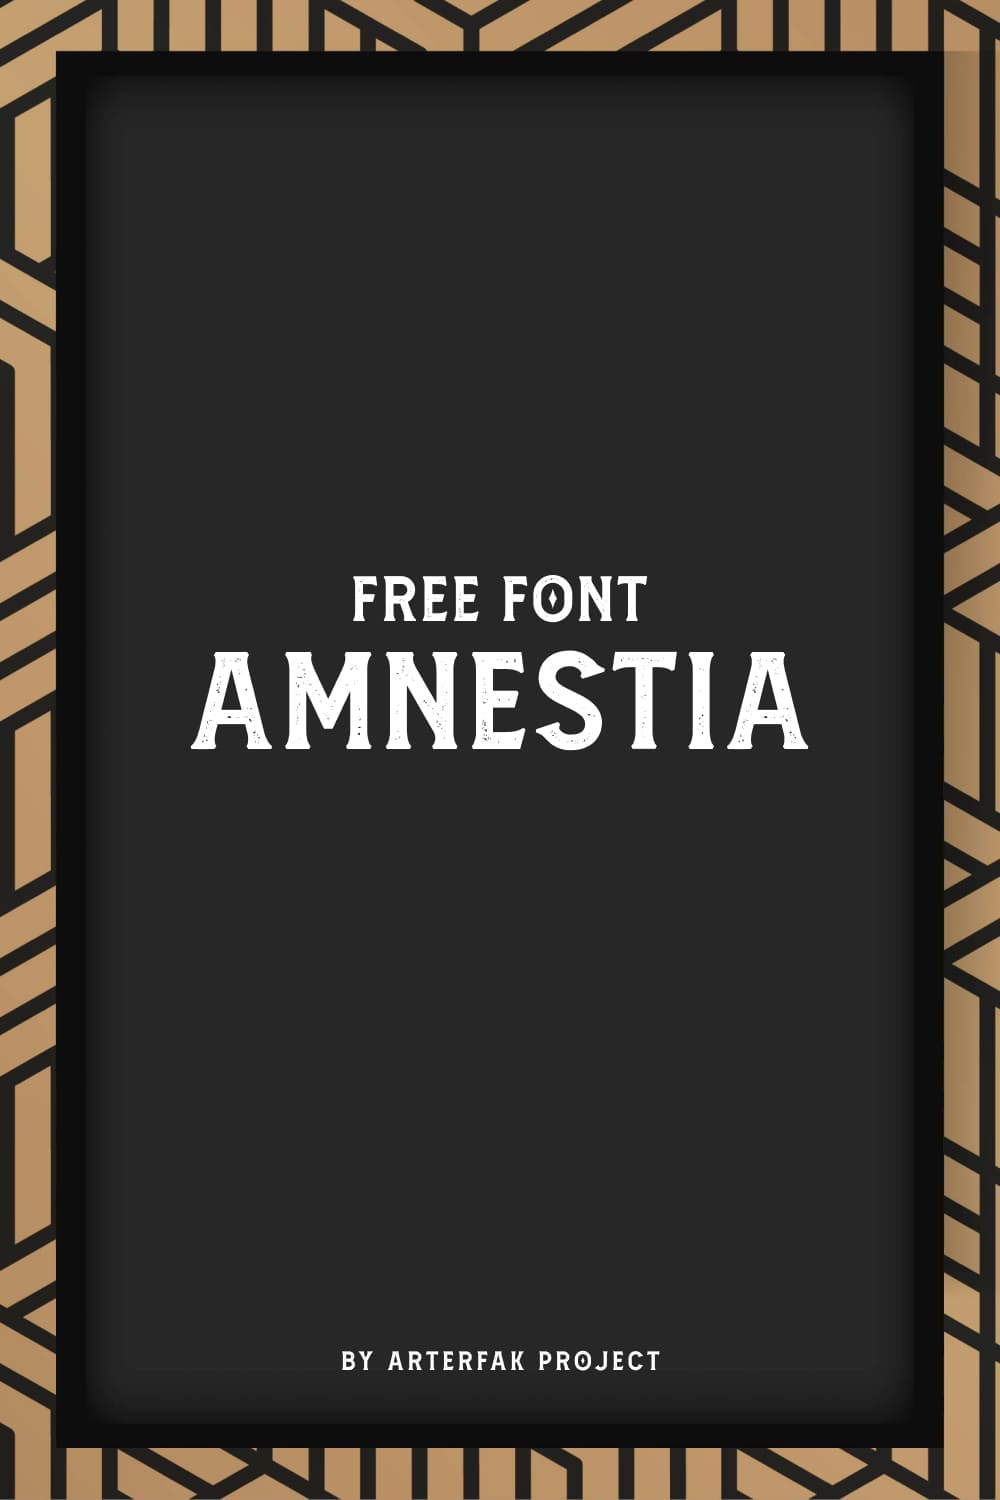 Amnestia Font title on black background with brown border.